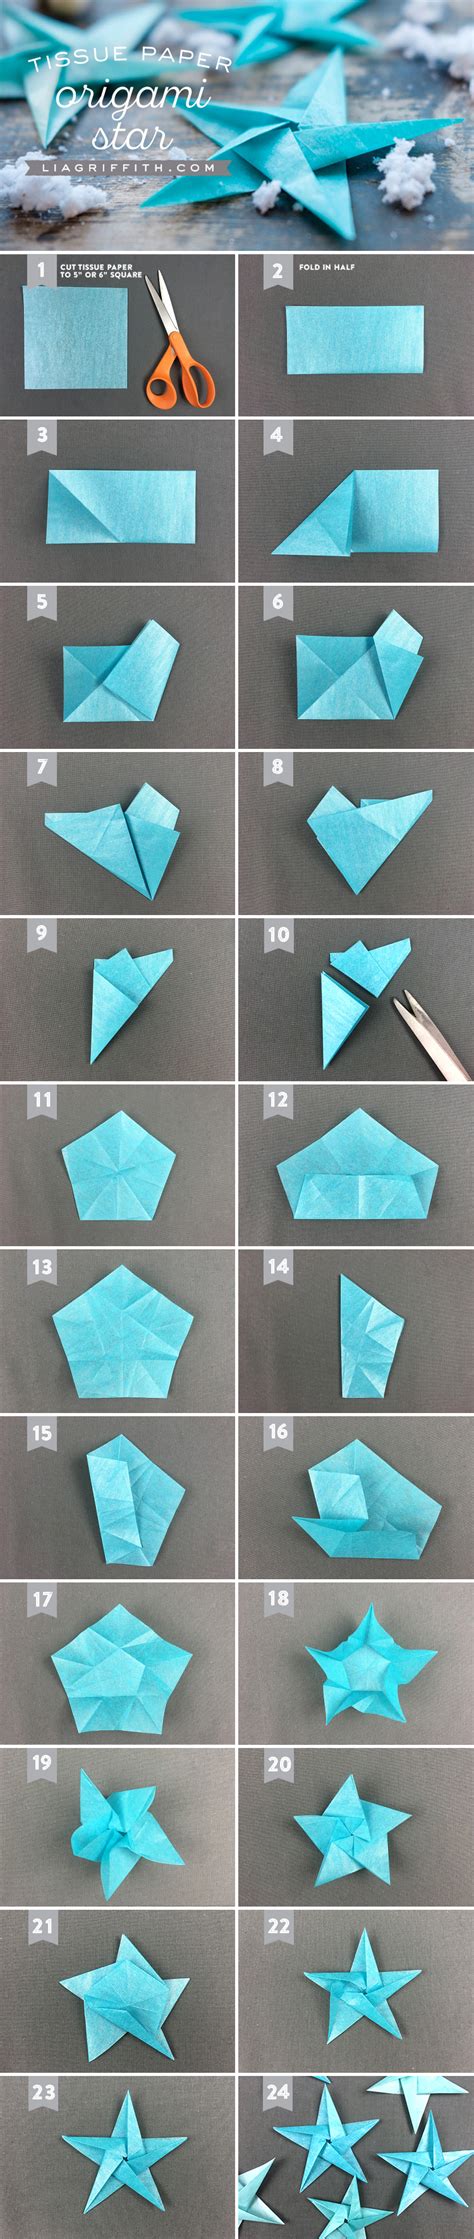 How To Make A Origami Christmas Star With Money How To Make Paper